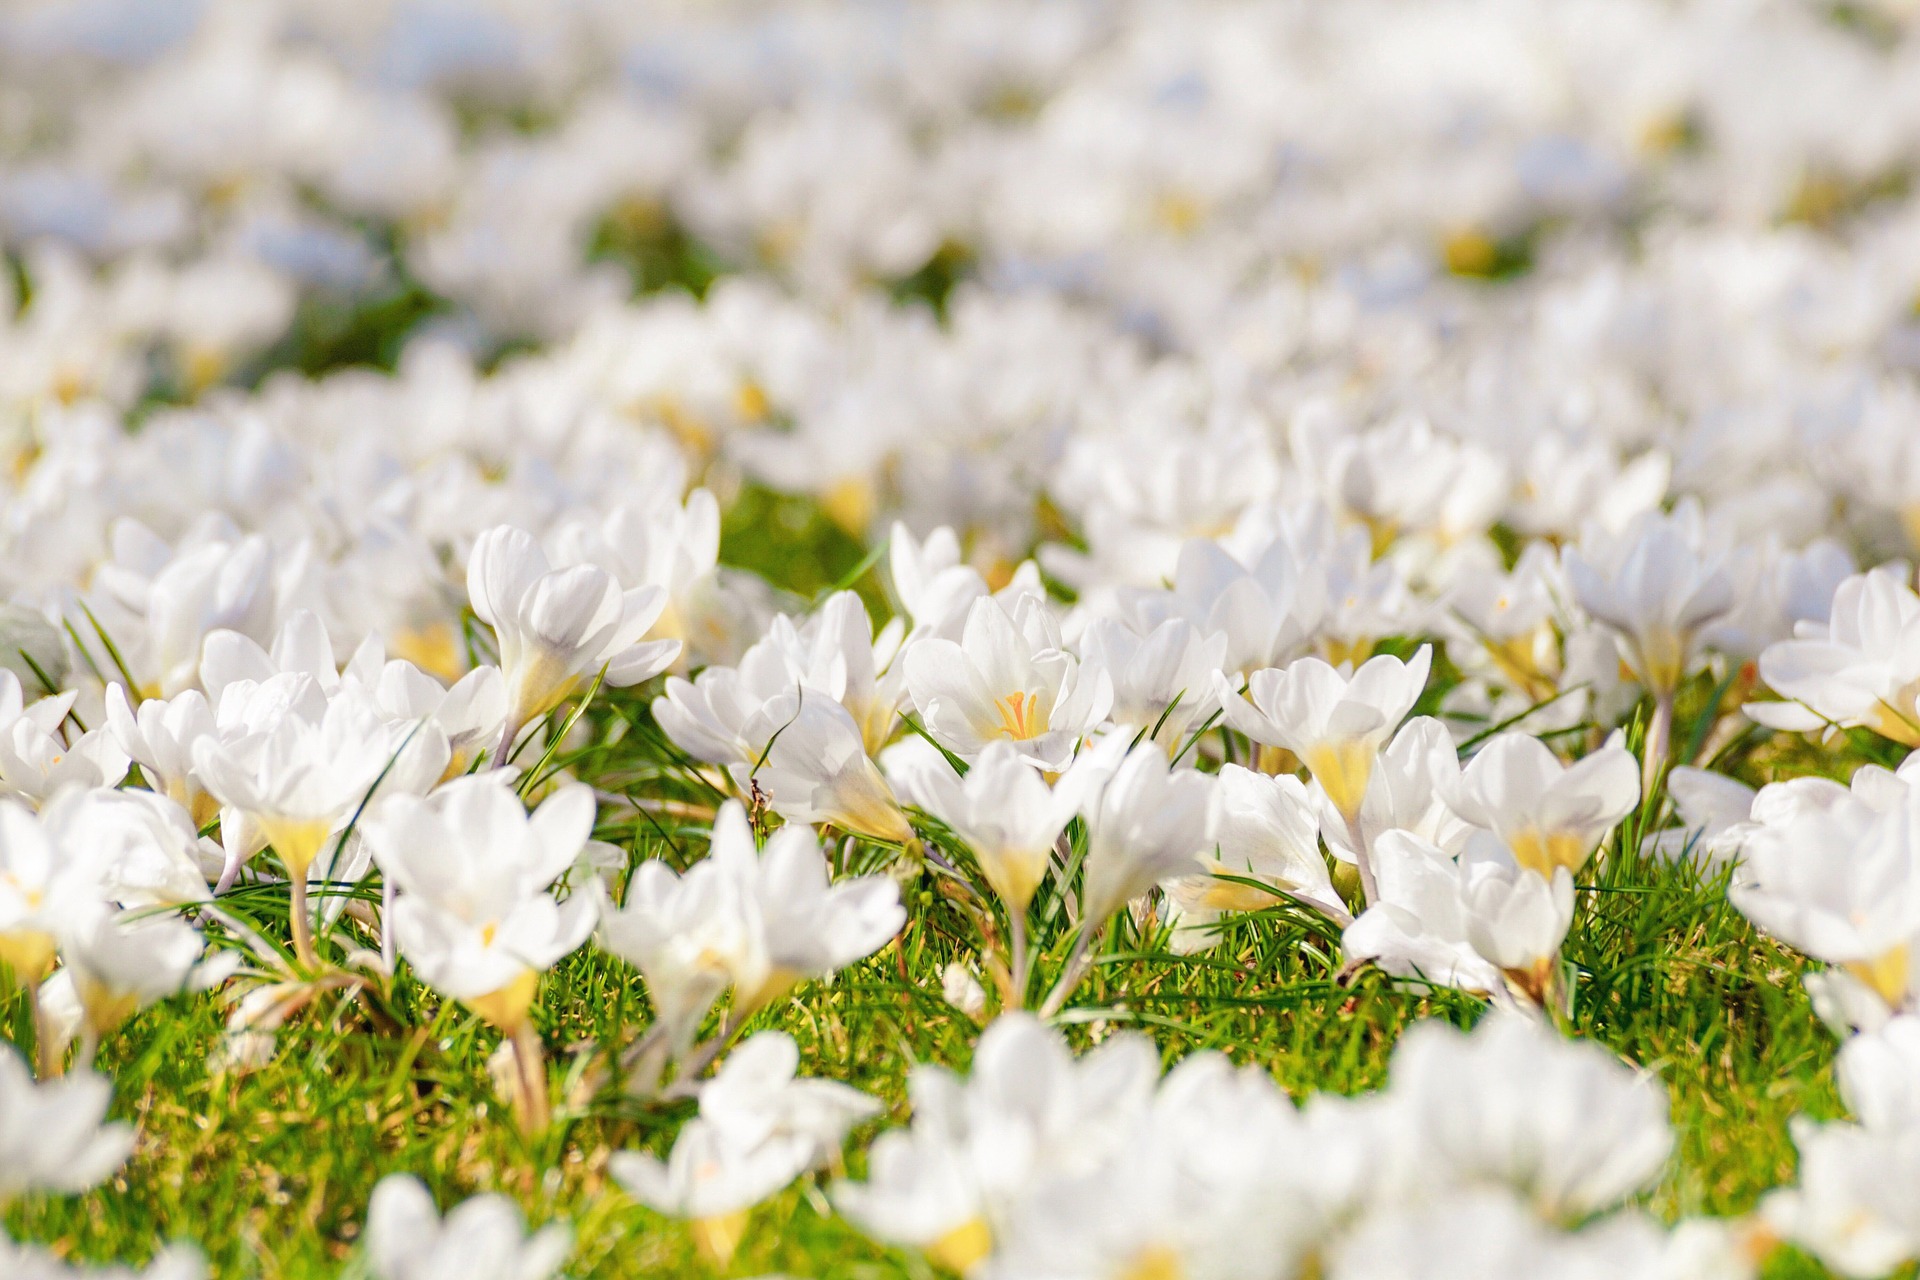 This image displays a lawn of white crocuses.